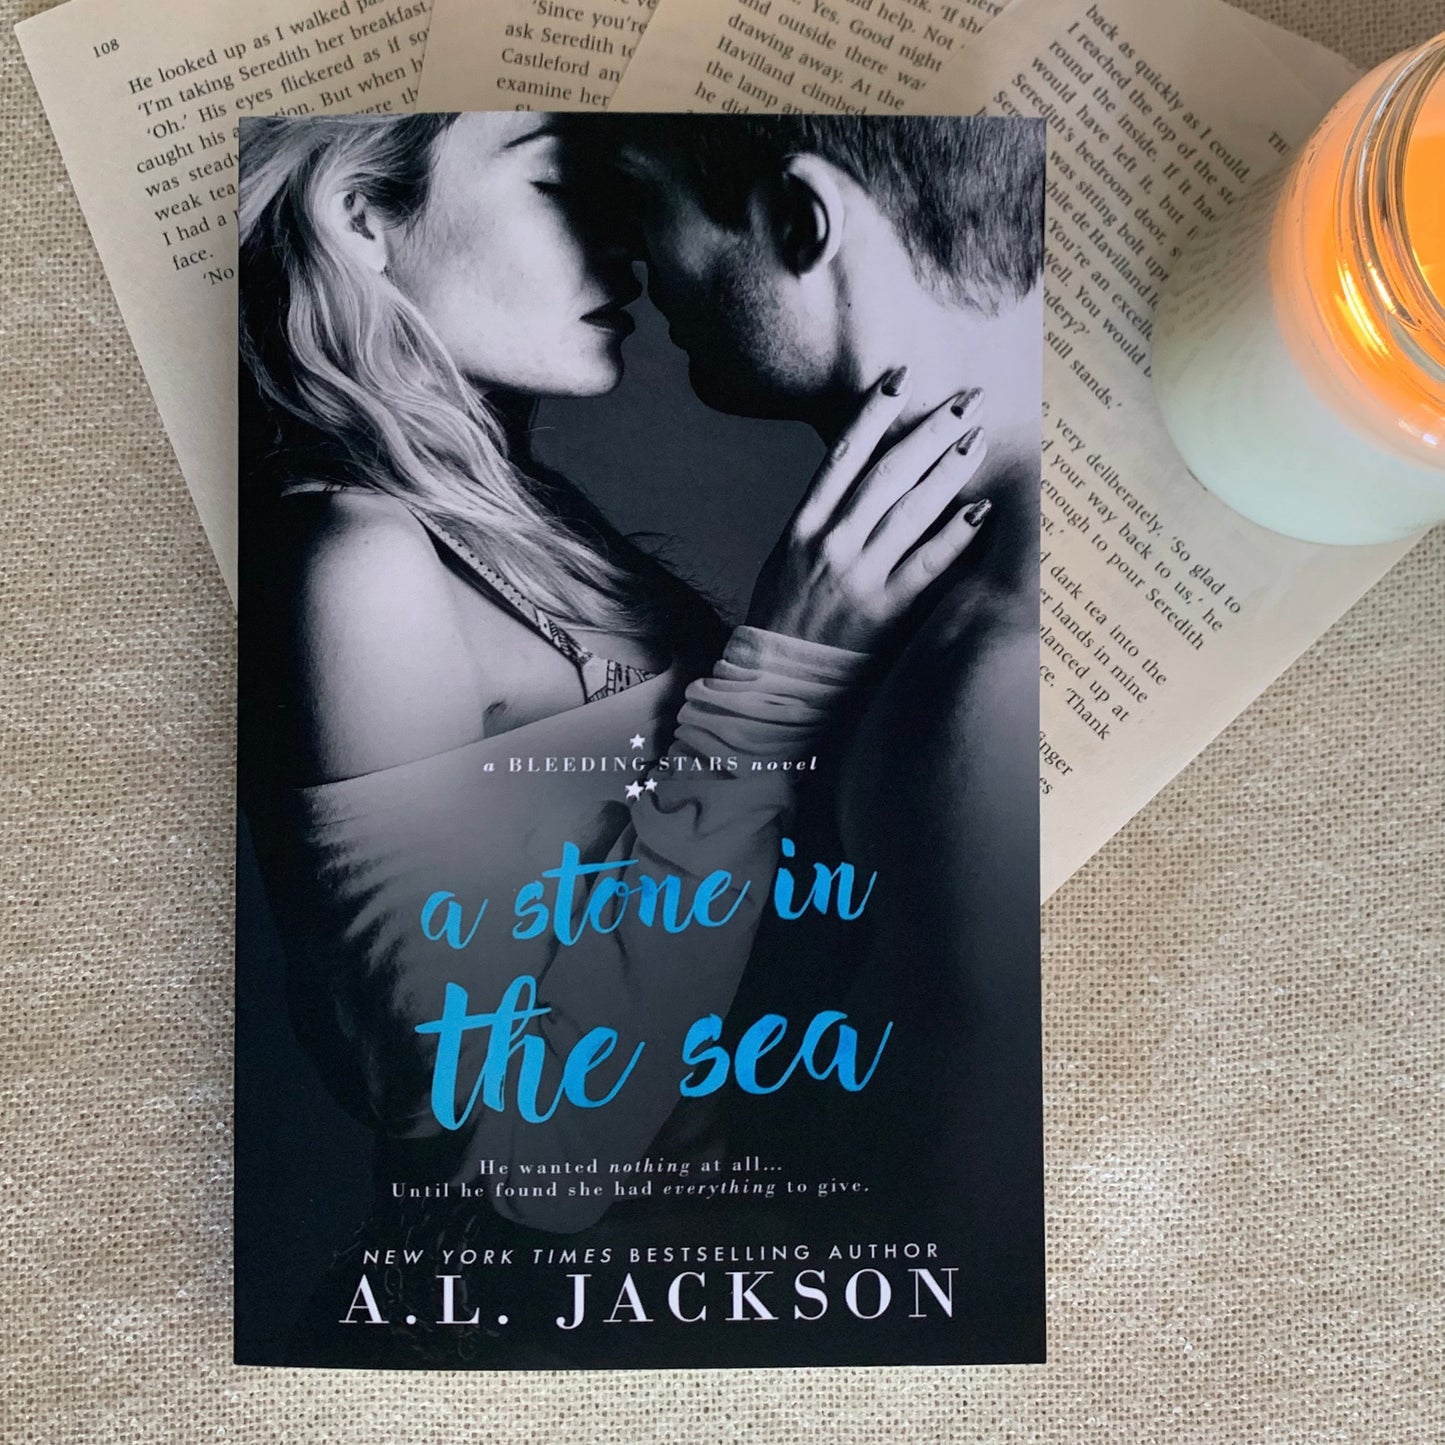 A Stone in the Sea by A. L Jackson